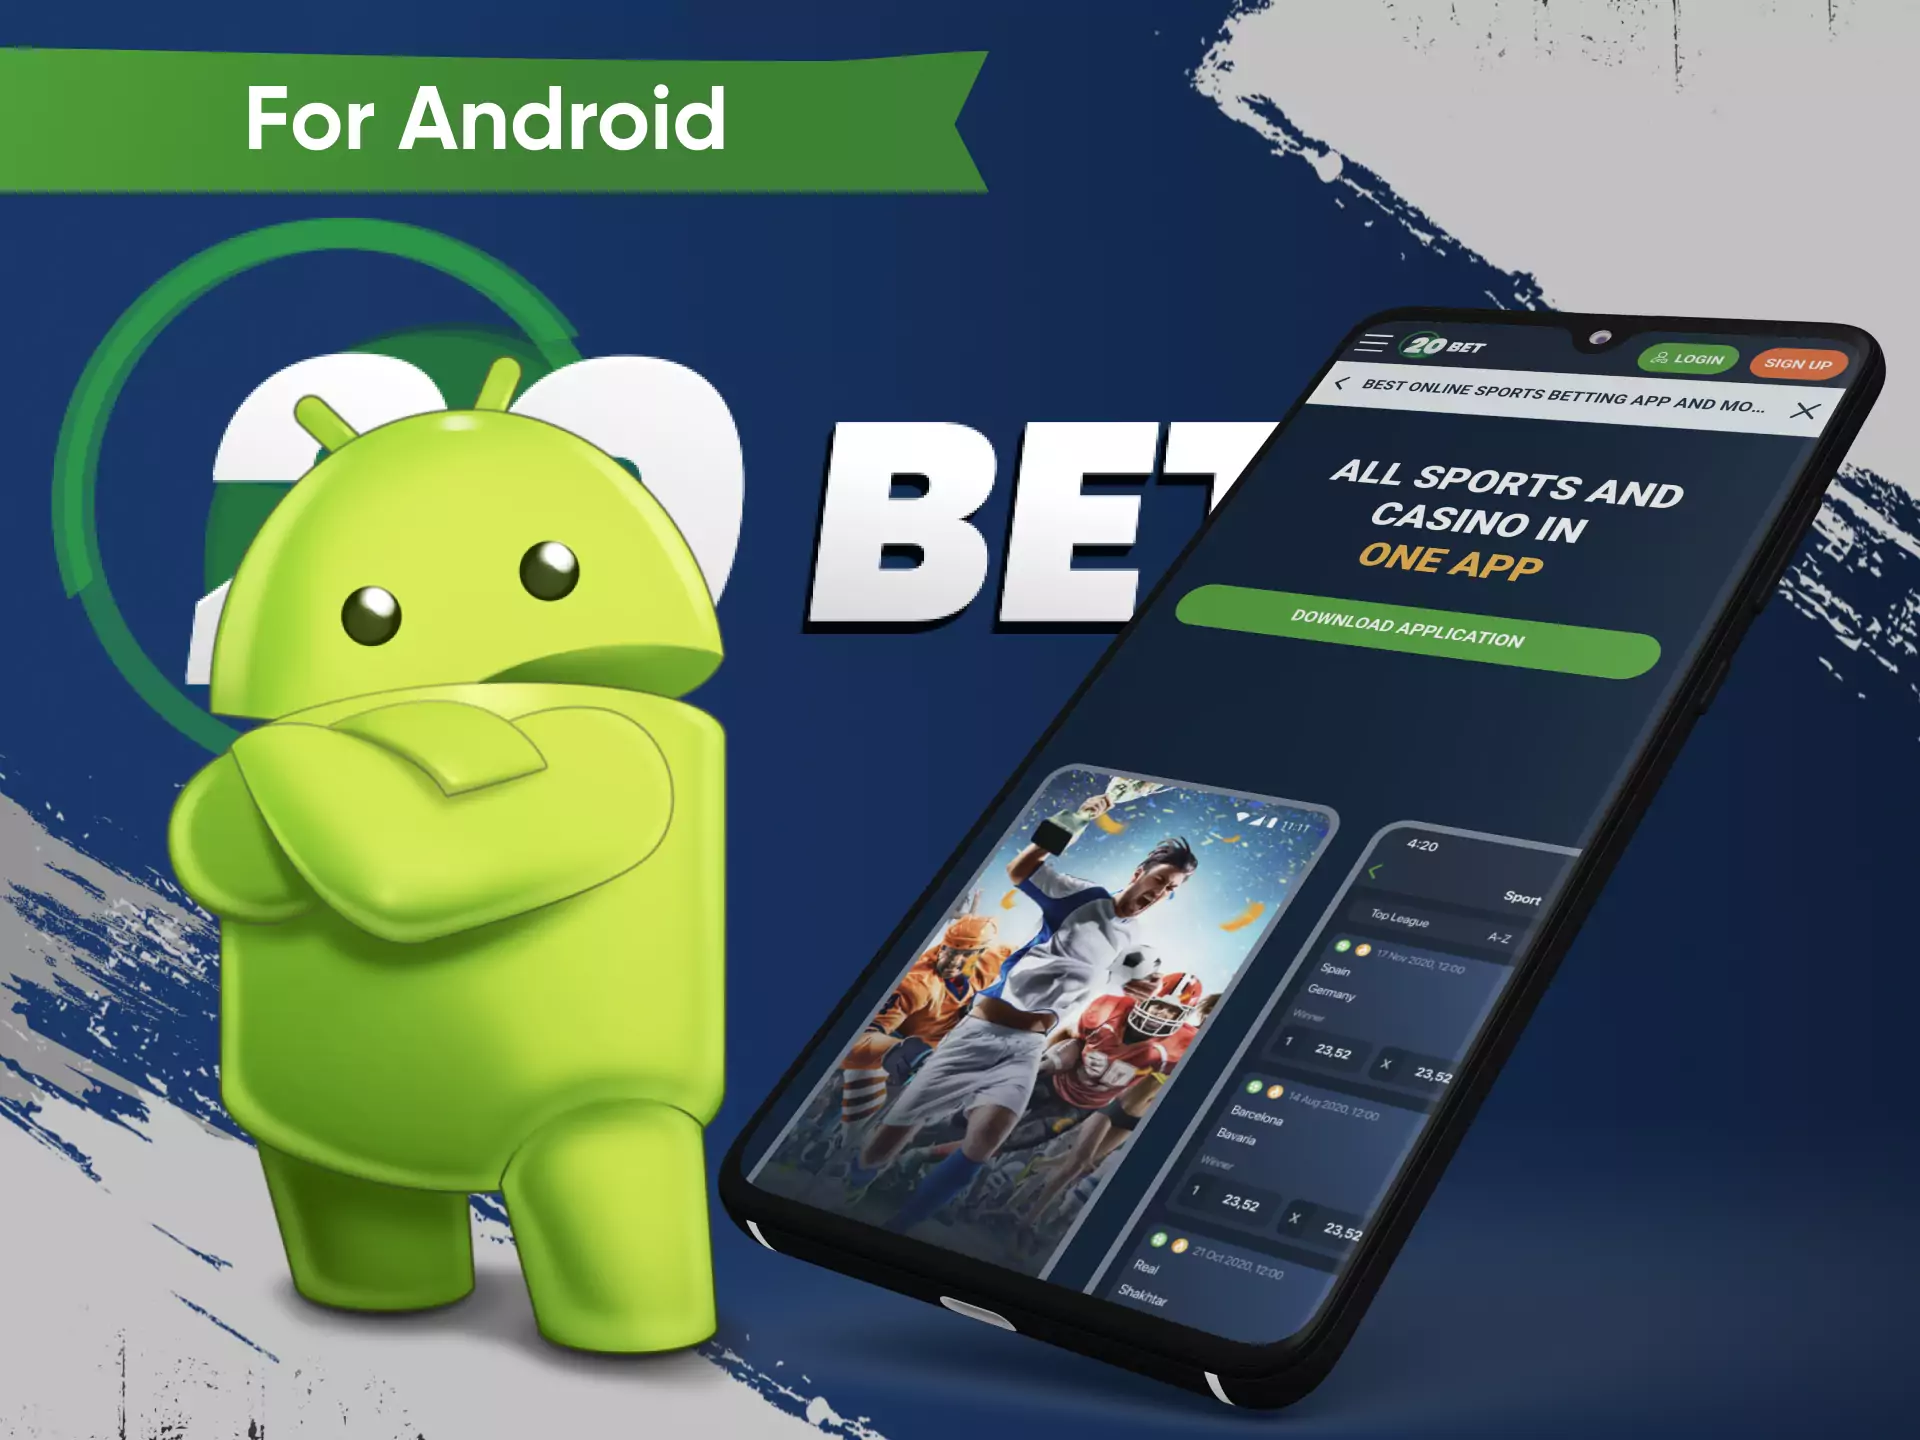 Download the Android application 20bet and install it on your device.